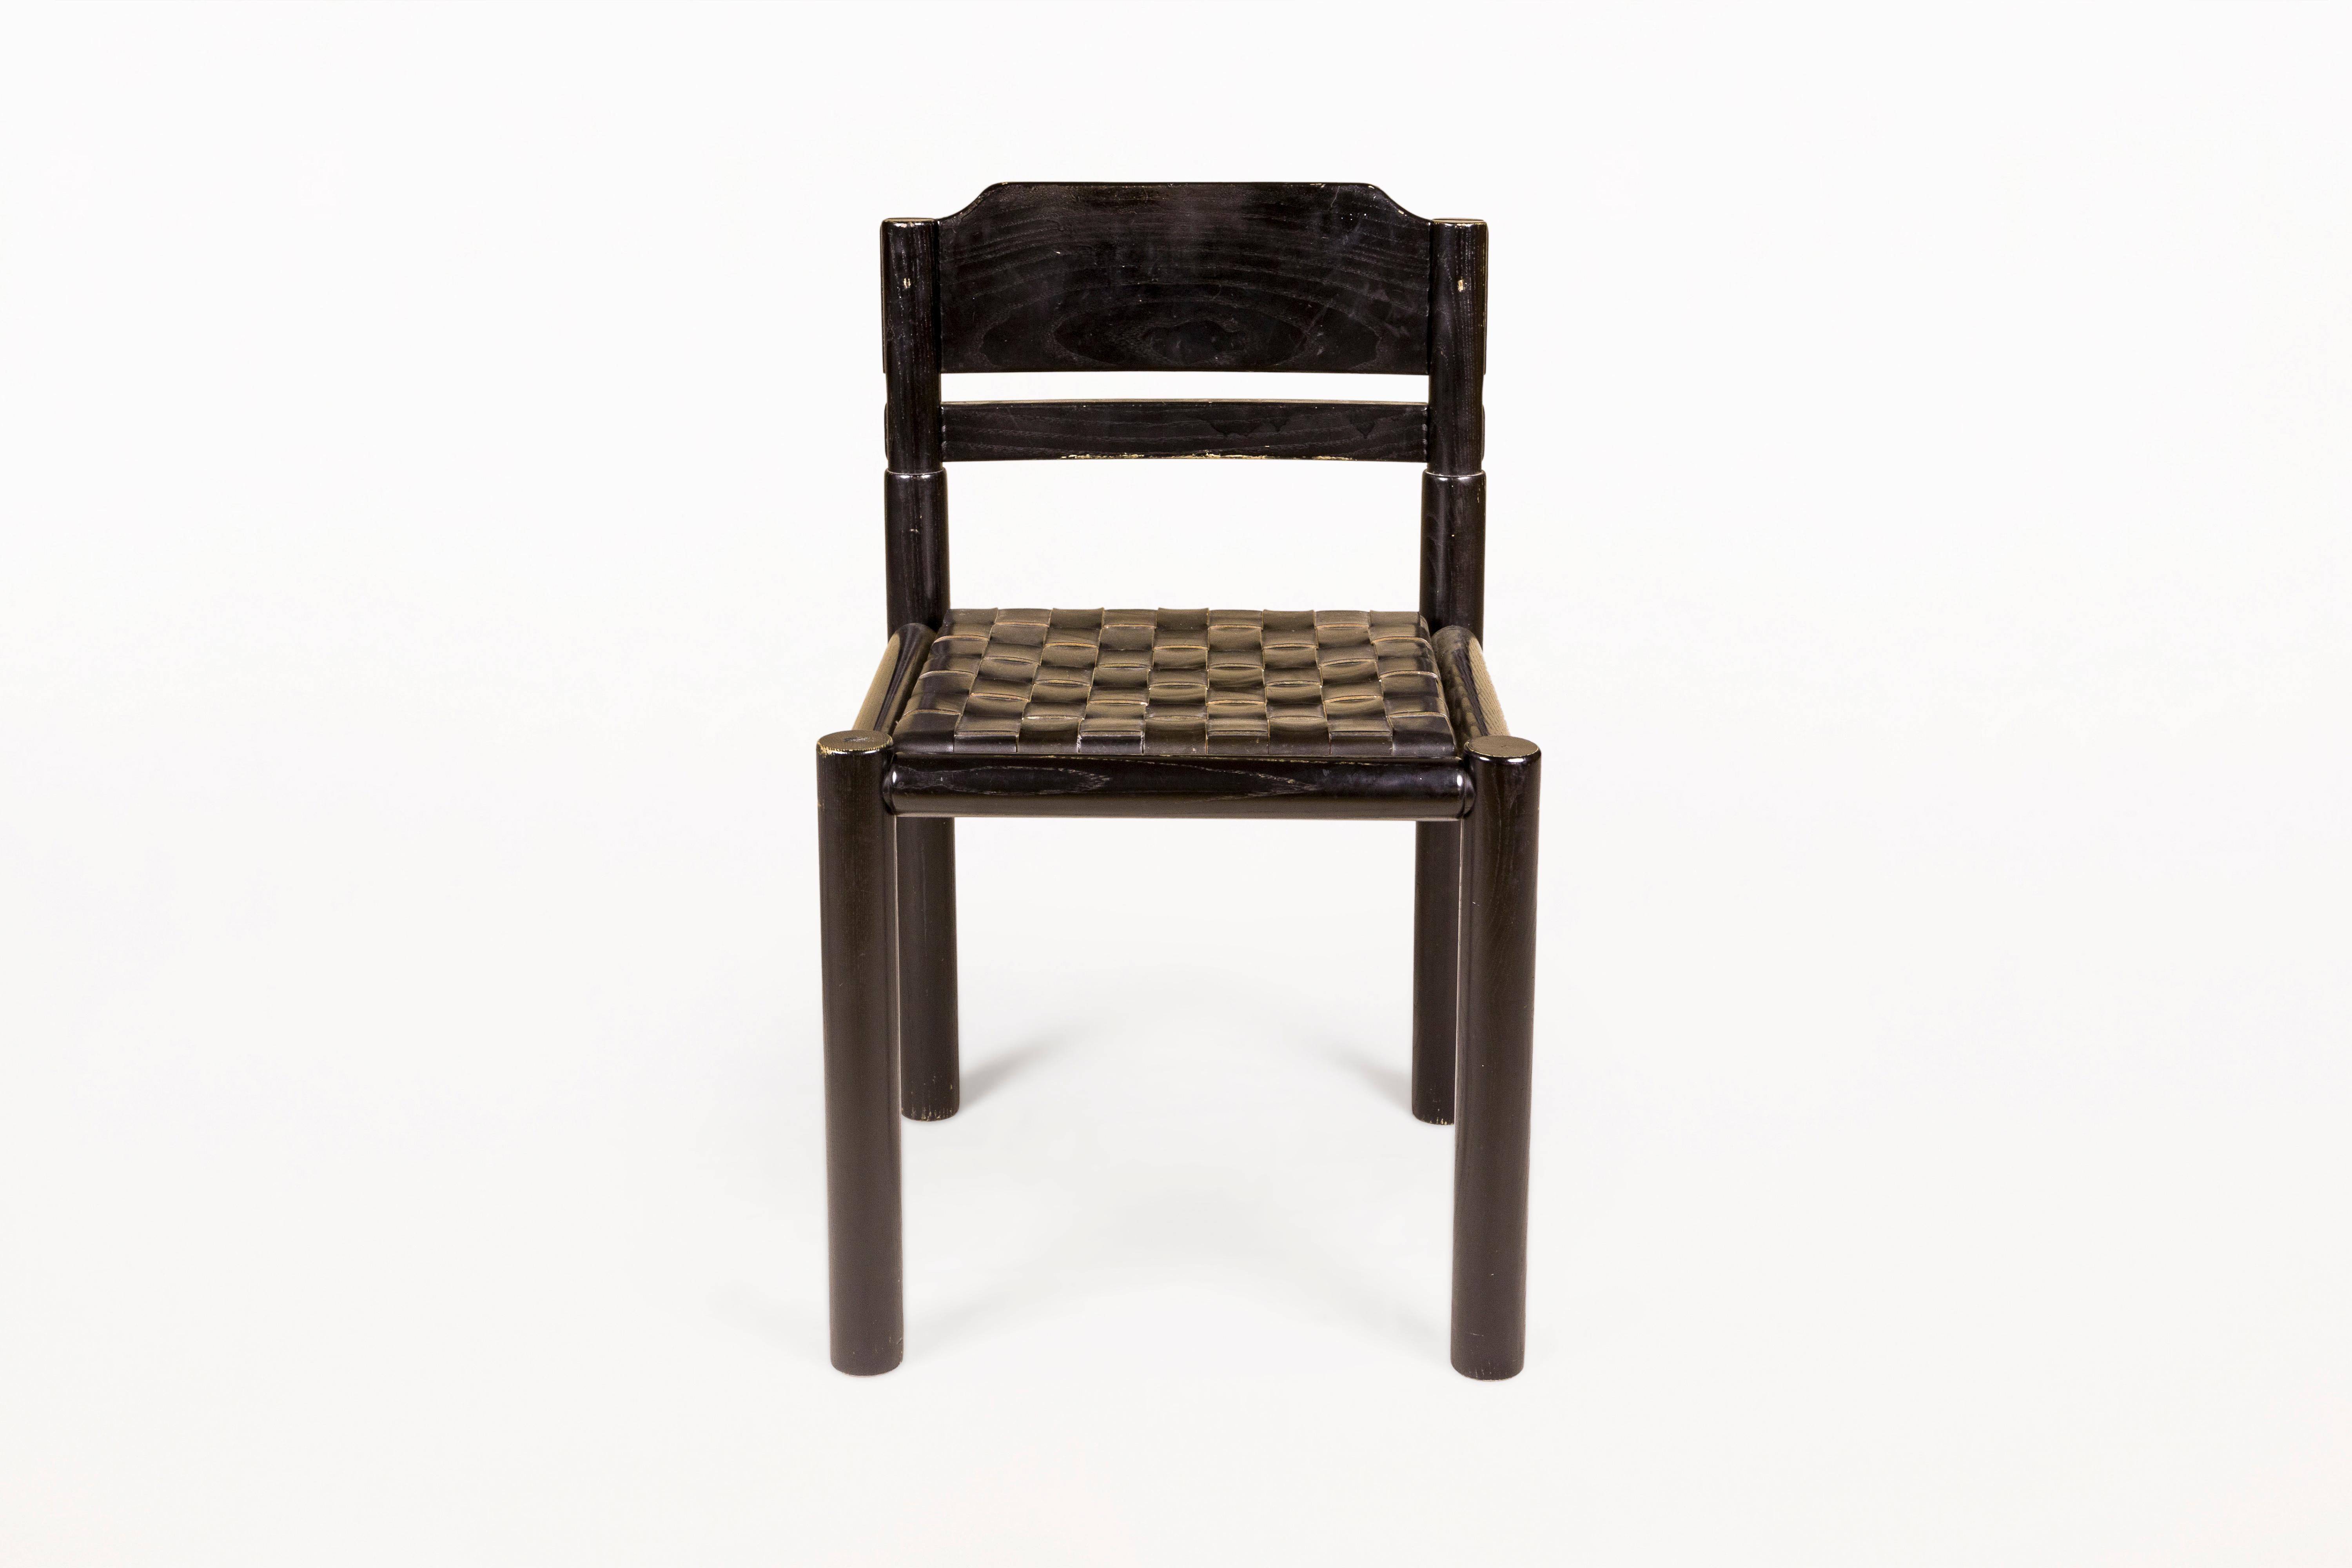 Set of six chairs.
Very decorative.
Made with tinted oak and leather.
Circa 1960, France.
Very good vintage condition.
Mid-Century Modern (MCM) is a design movement in interior, product, graphic design, architecture, and urban development that was